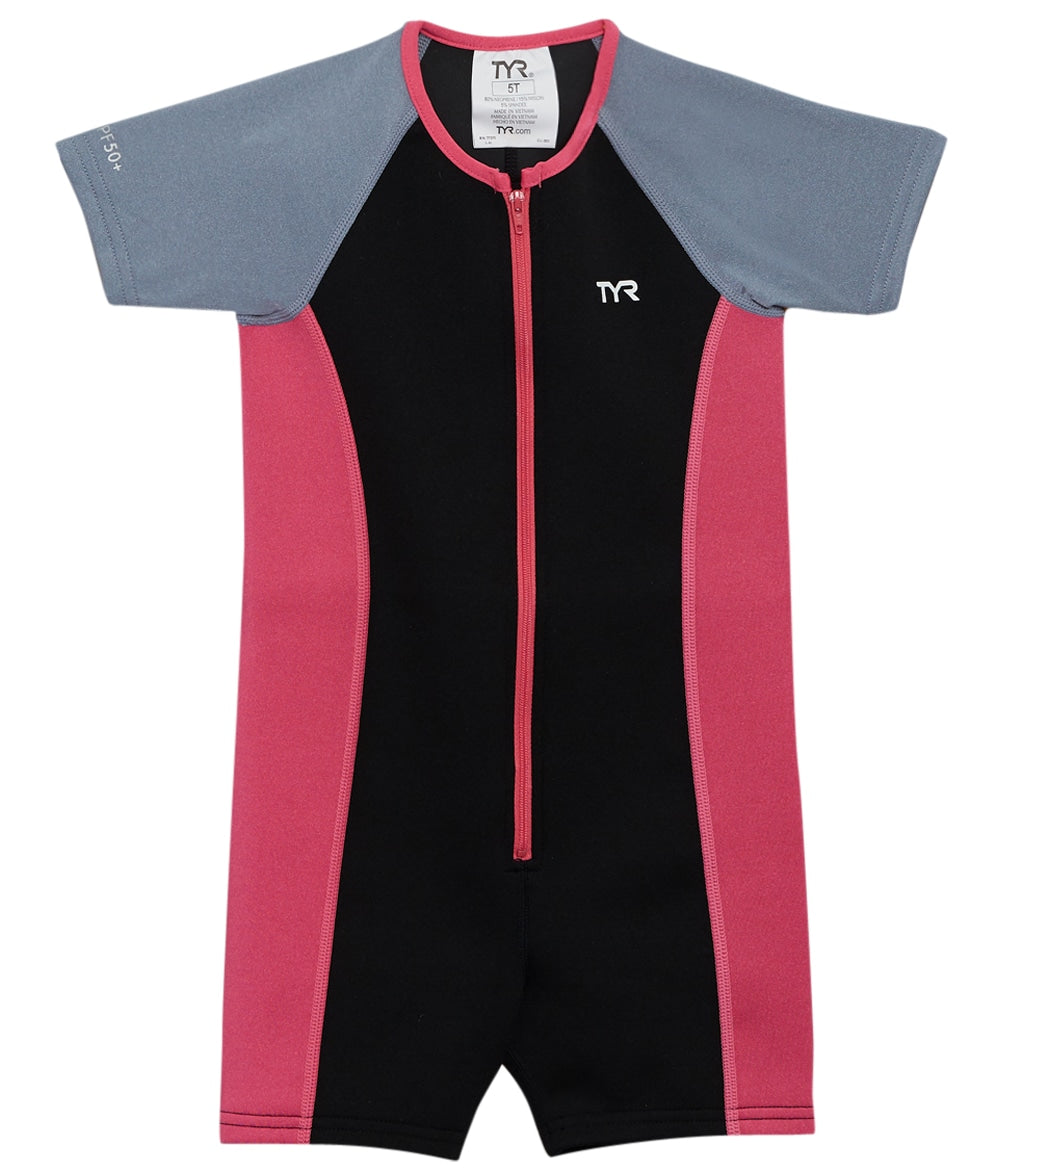 TYR Girls' Upf 50+ Short Sleeve Solid Thermal Suit Toddler/Little/Big Kid - Black/Grey/Pink 3T - Swimoutlet.com